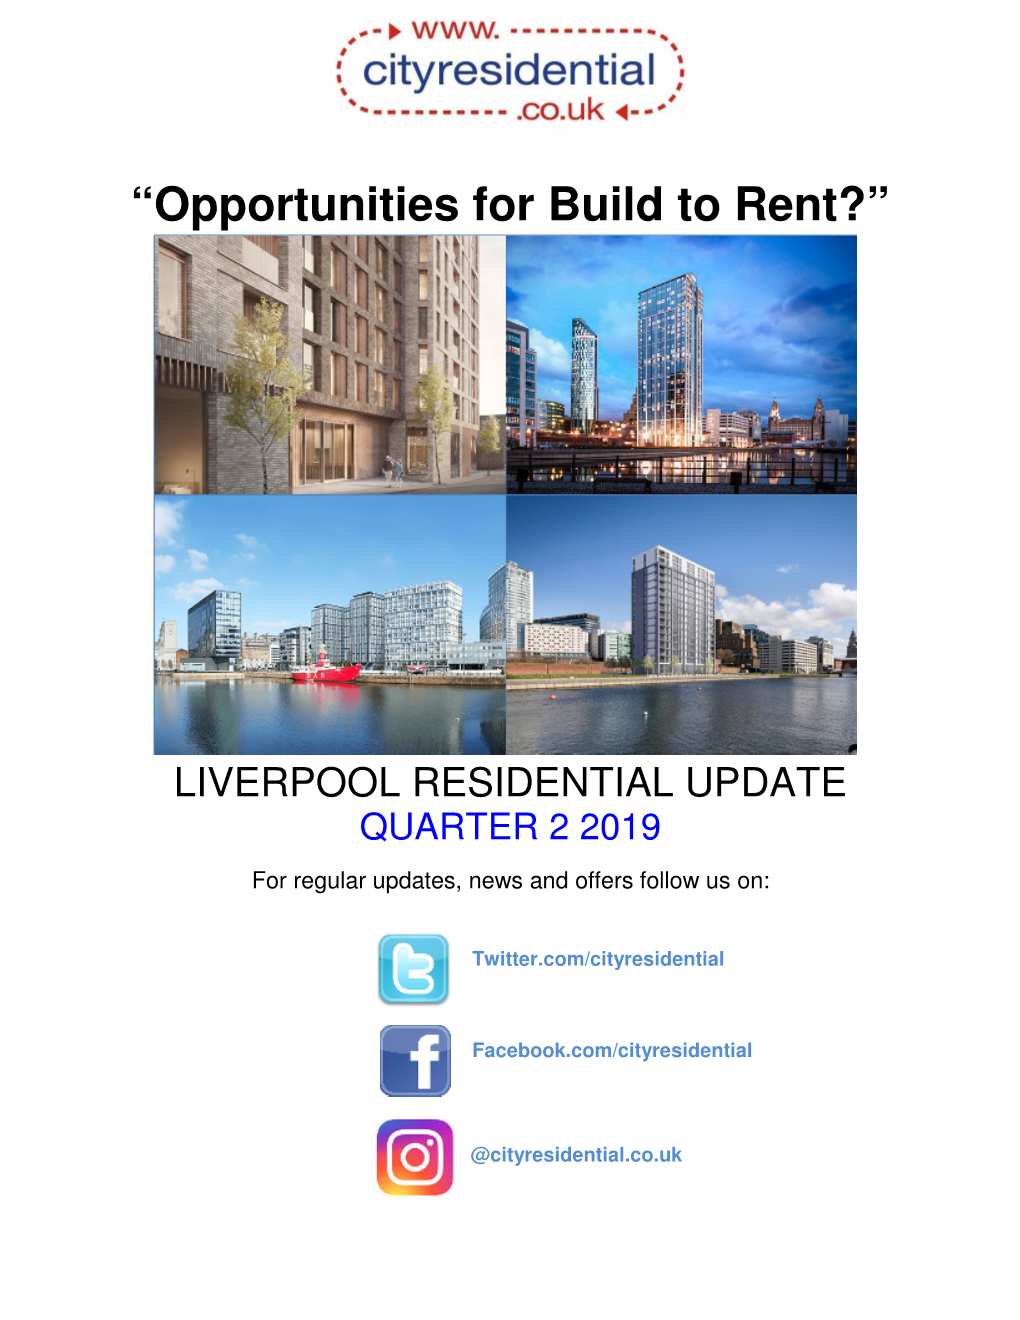 “Opportunities for Build to Rent?”